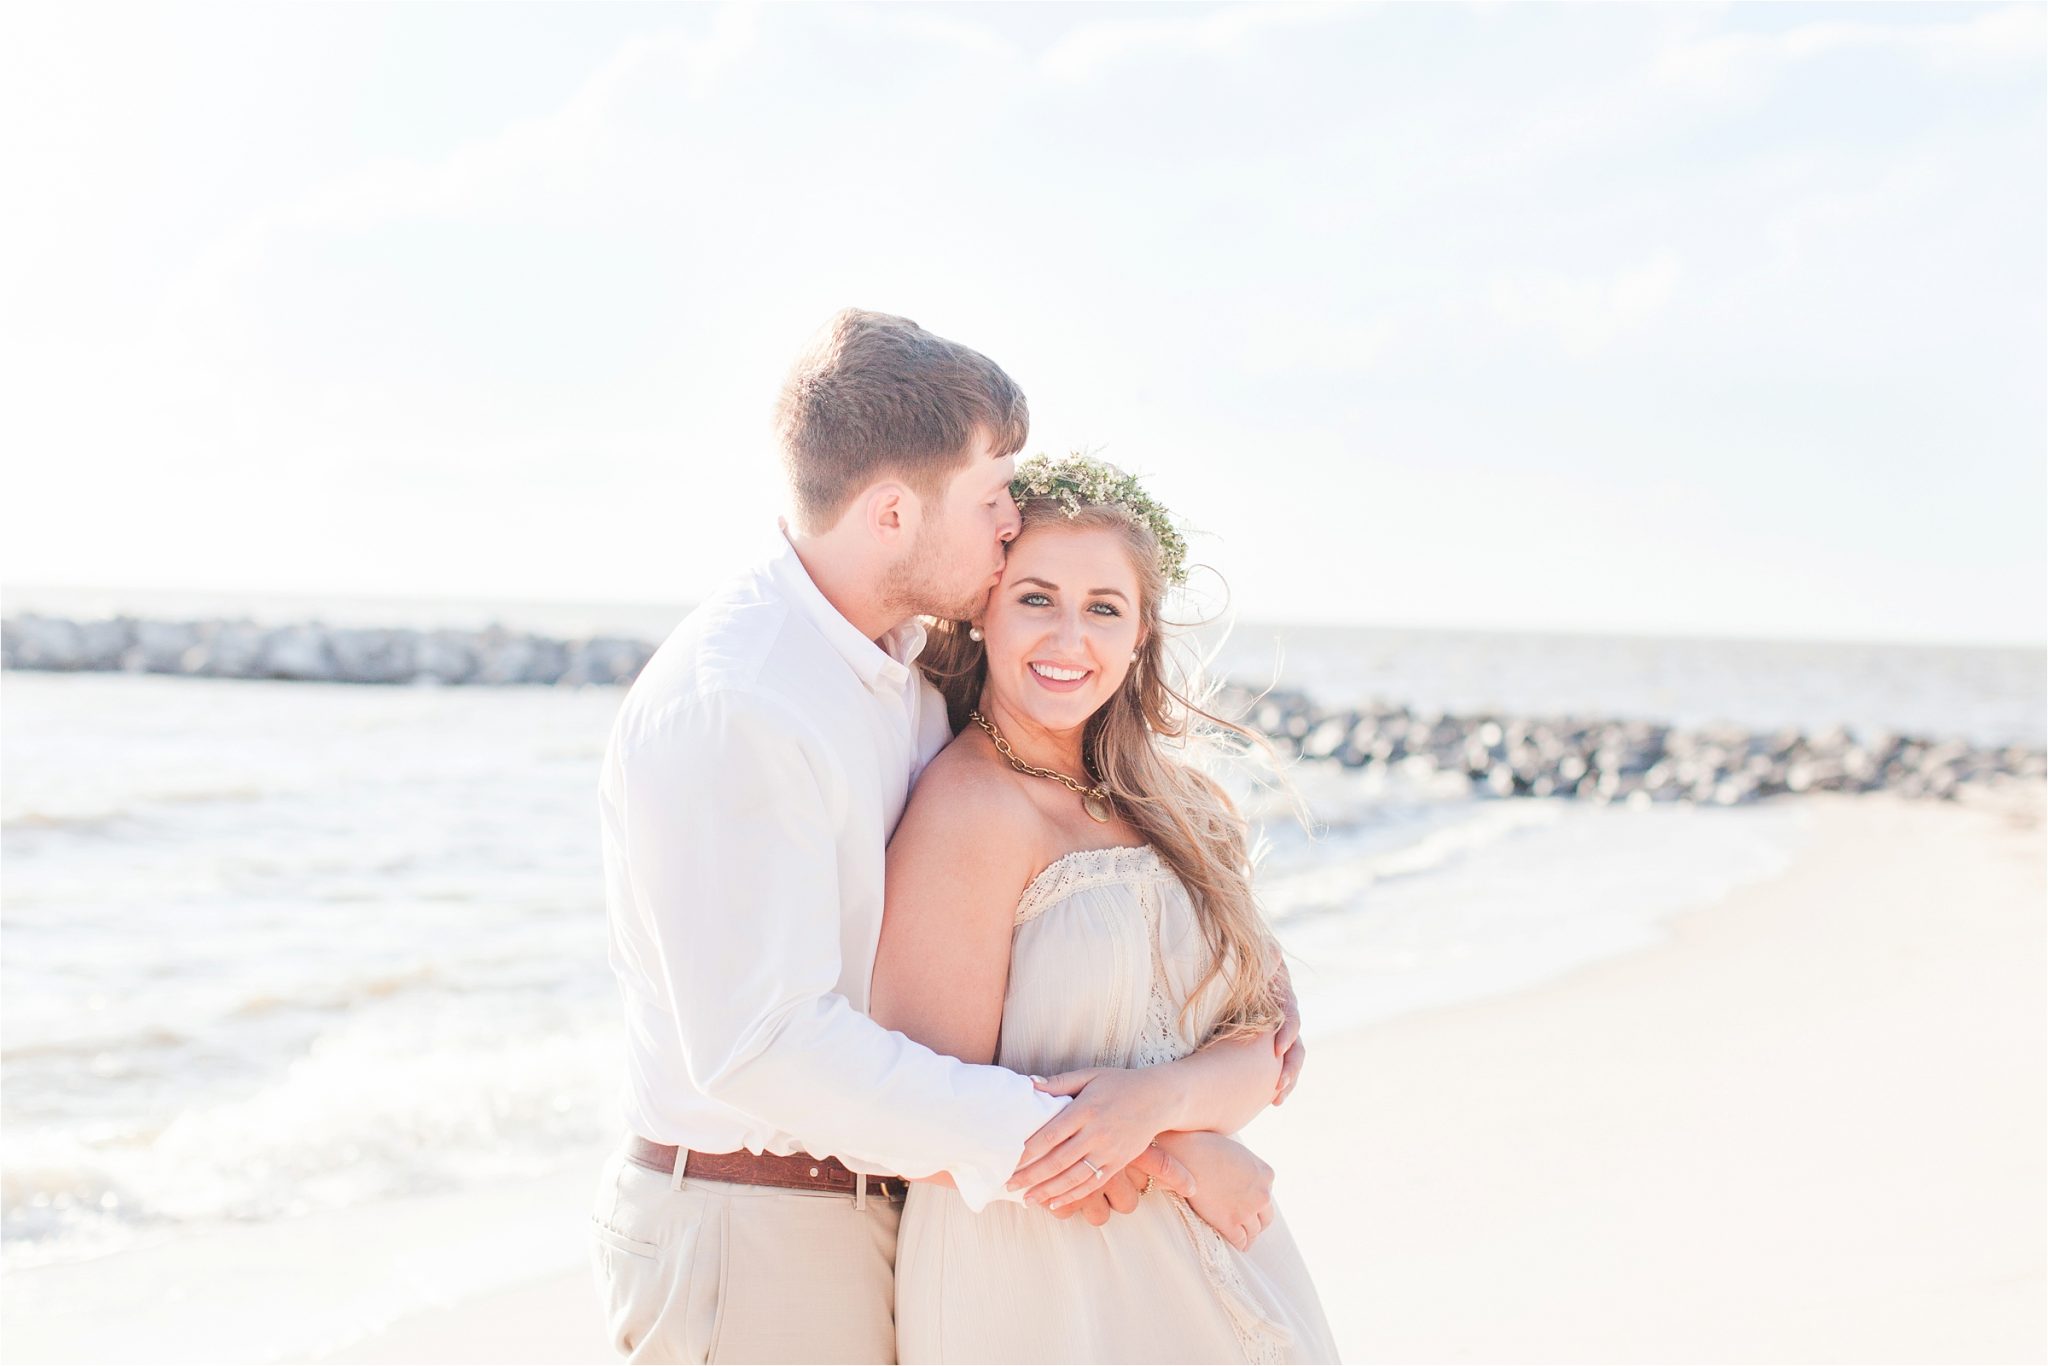 Point Clear Engagement Session at the Grand Hotel-Mary Catherine + Chase-Whimsical engagement shoot-Neutral engagement shoot-Fairytale engagement shoot-Beach engagement